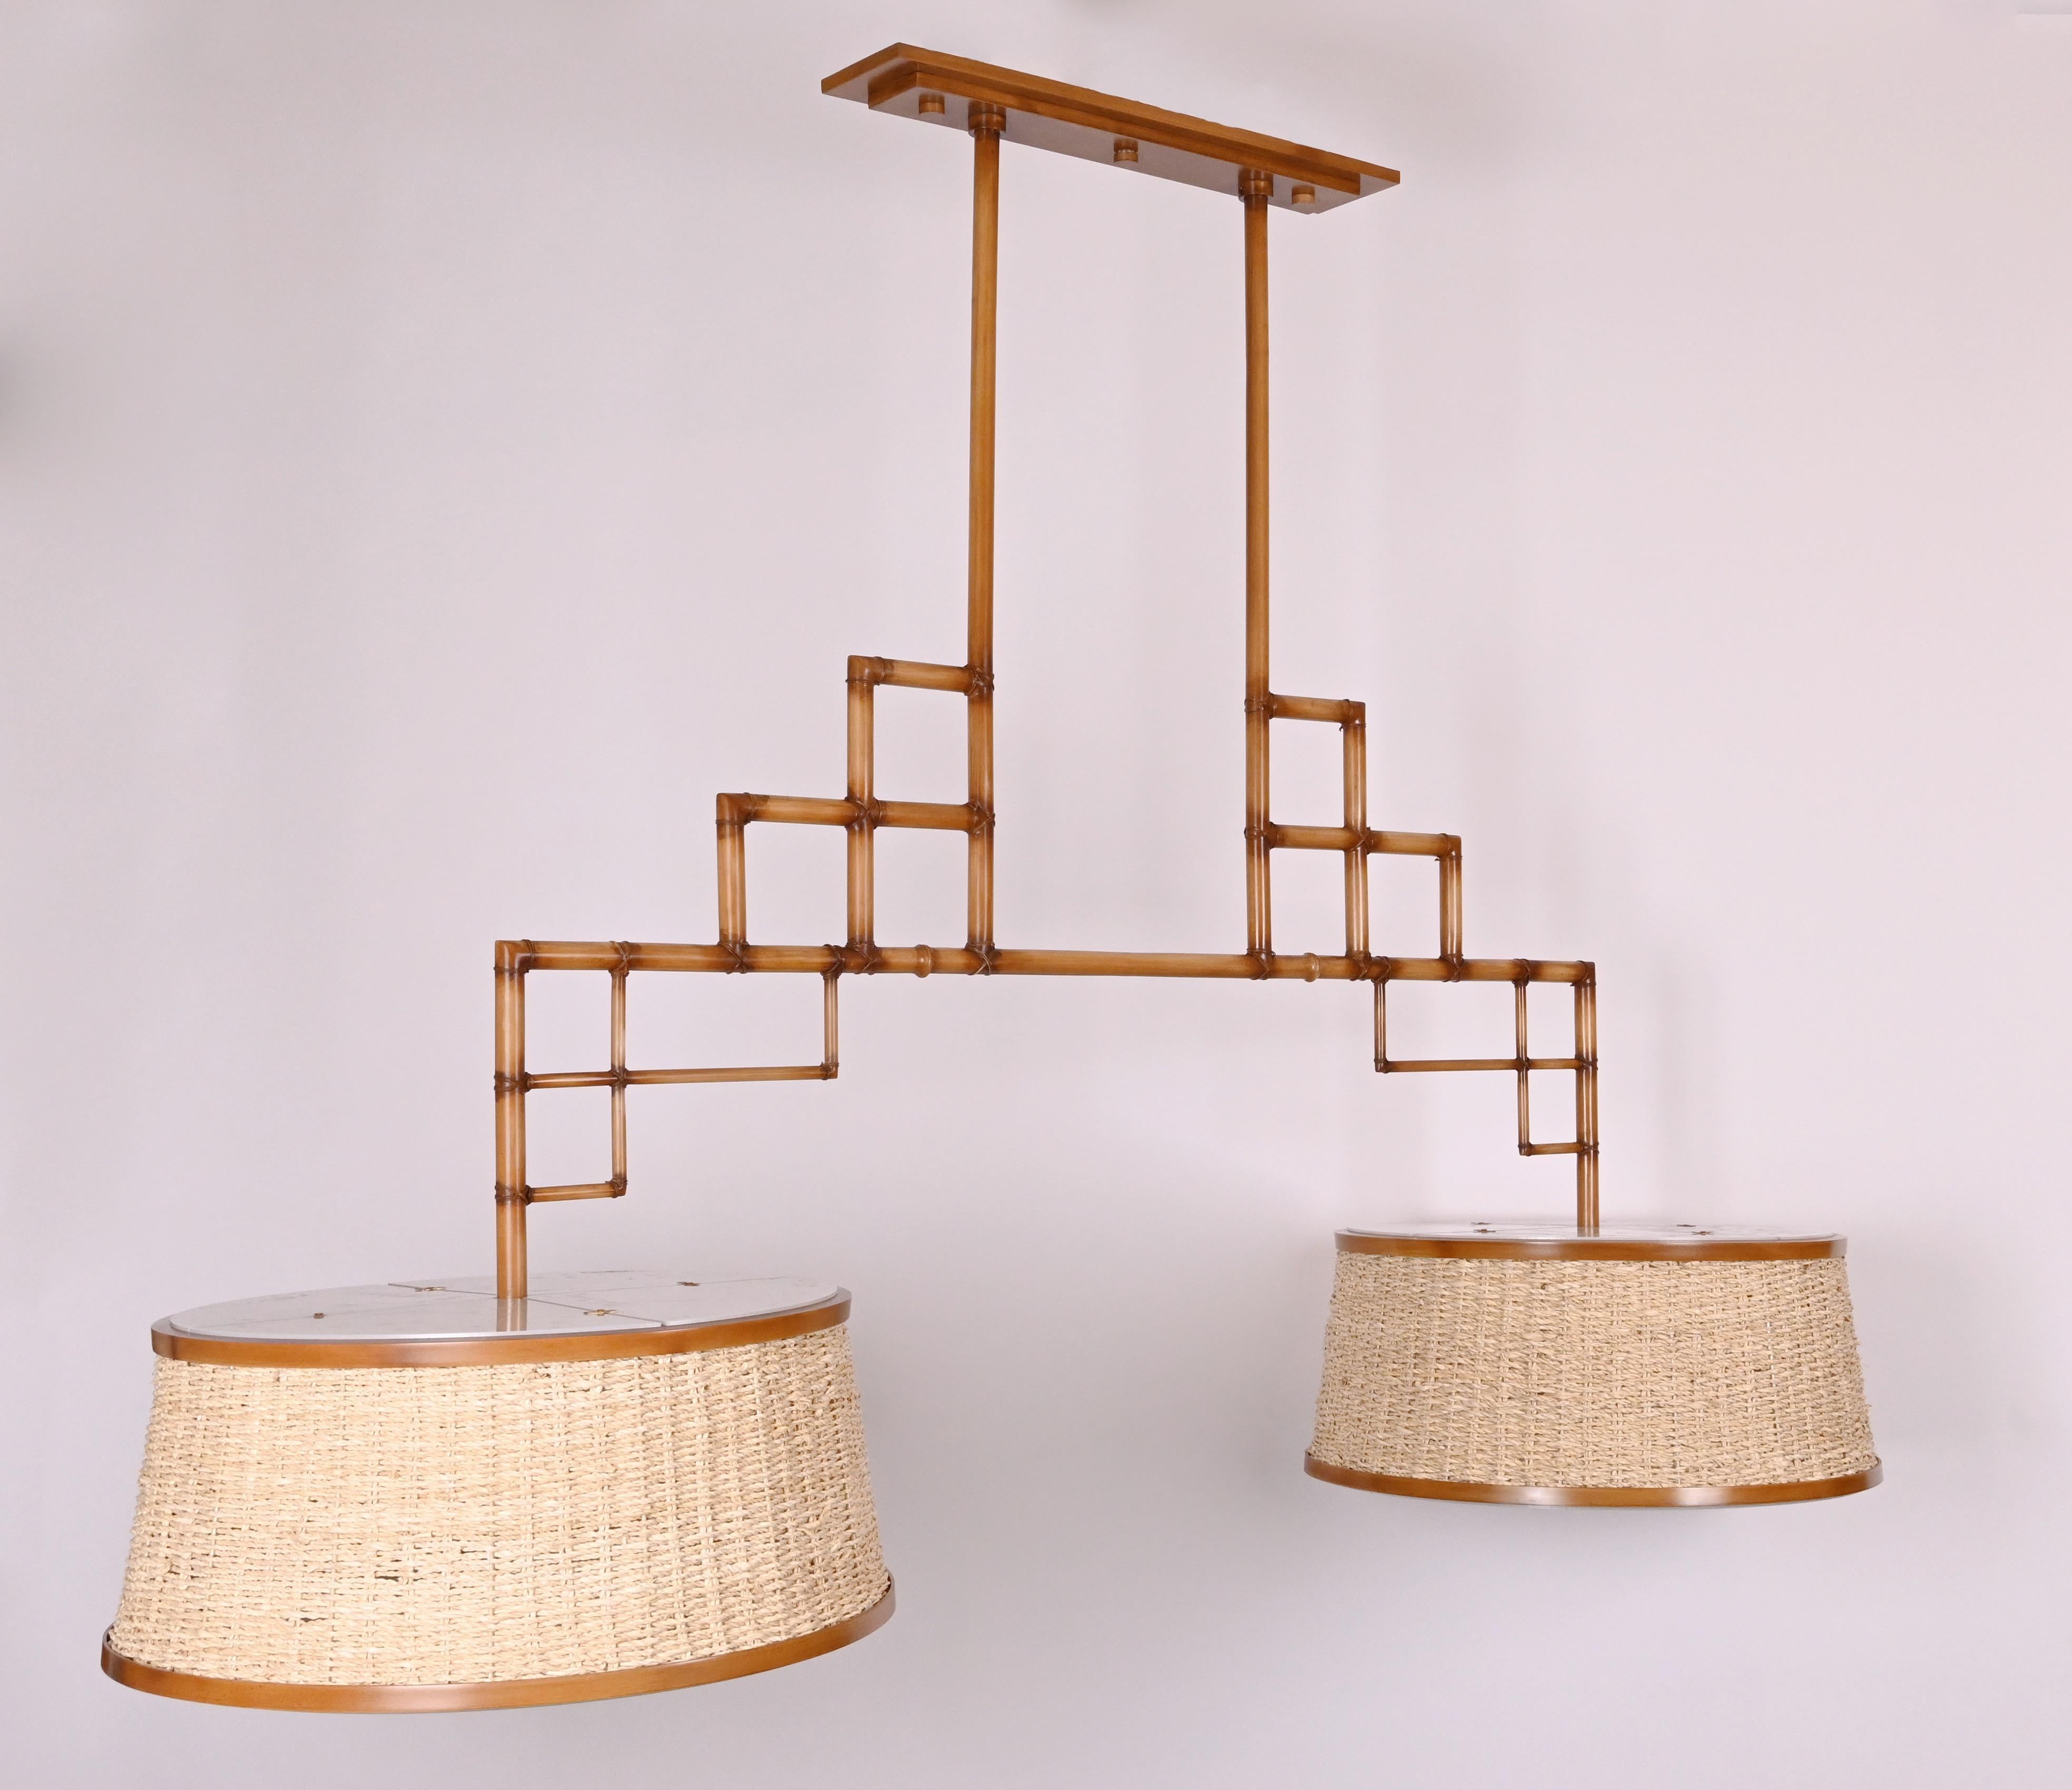 David Duncan Studio Bamboo Billiard Fixture, featuring an intricately constructed geometric frame formed by cross-banded sections of hand-painted faux bamboo made from brass, with two light sources of wicker shades issuing a total of eight Edison